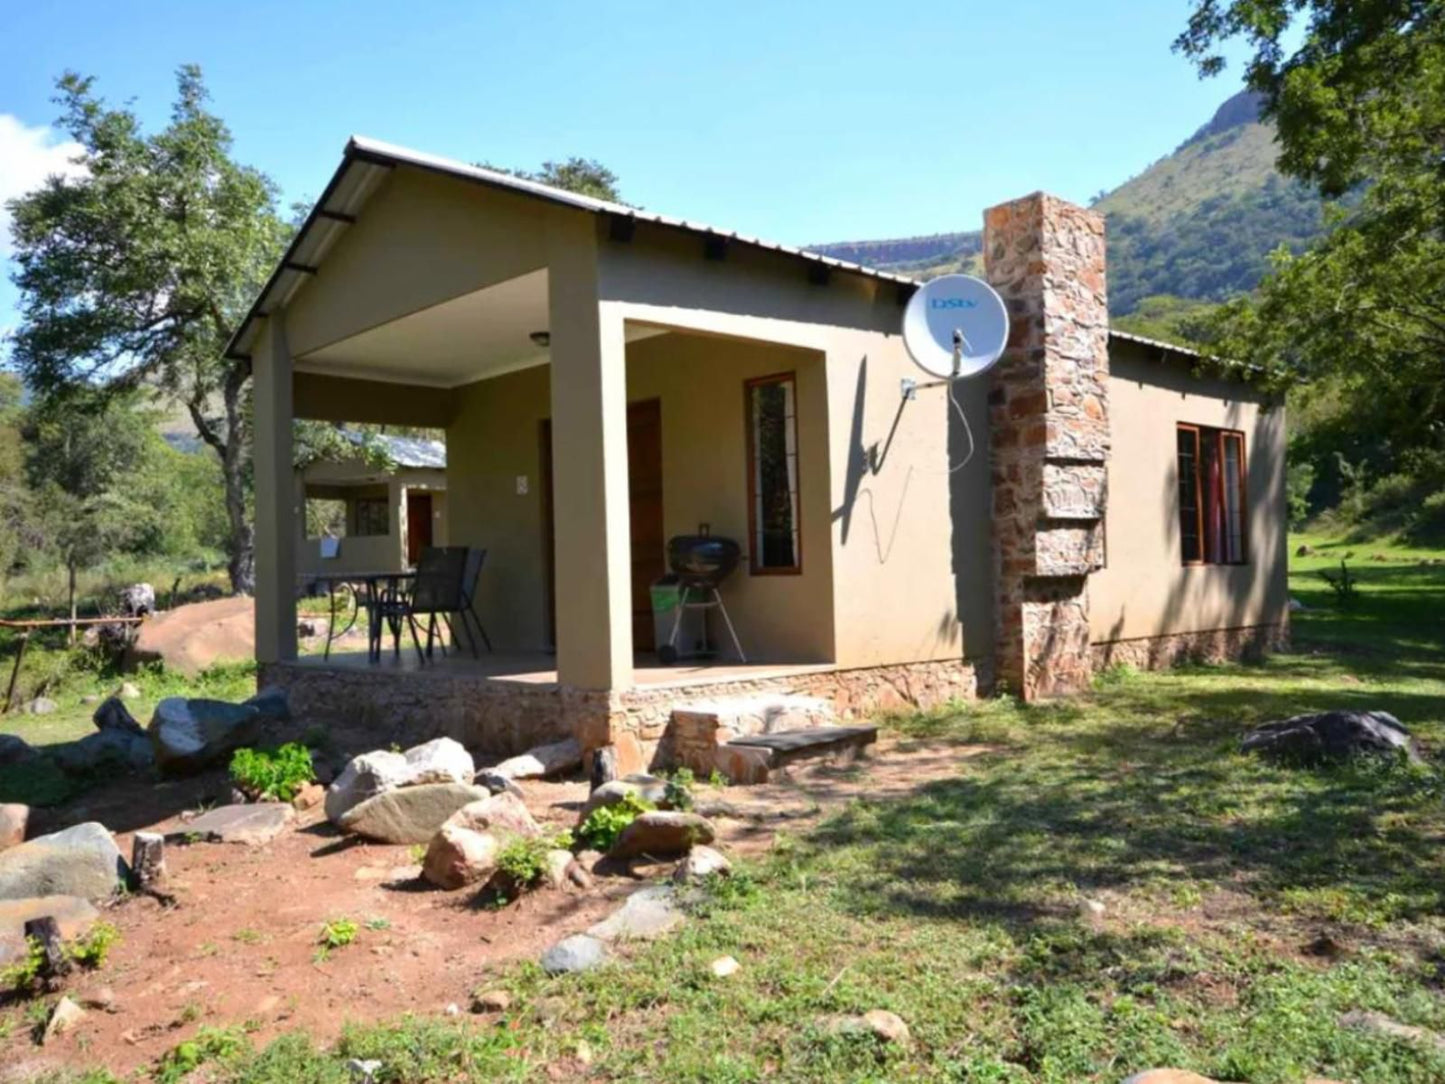 Rocky Drift Private Nature Reserve Waterval Boven Mpumalanga South Africa Cabin, Building, Architecture